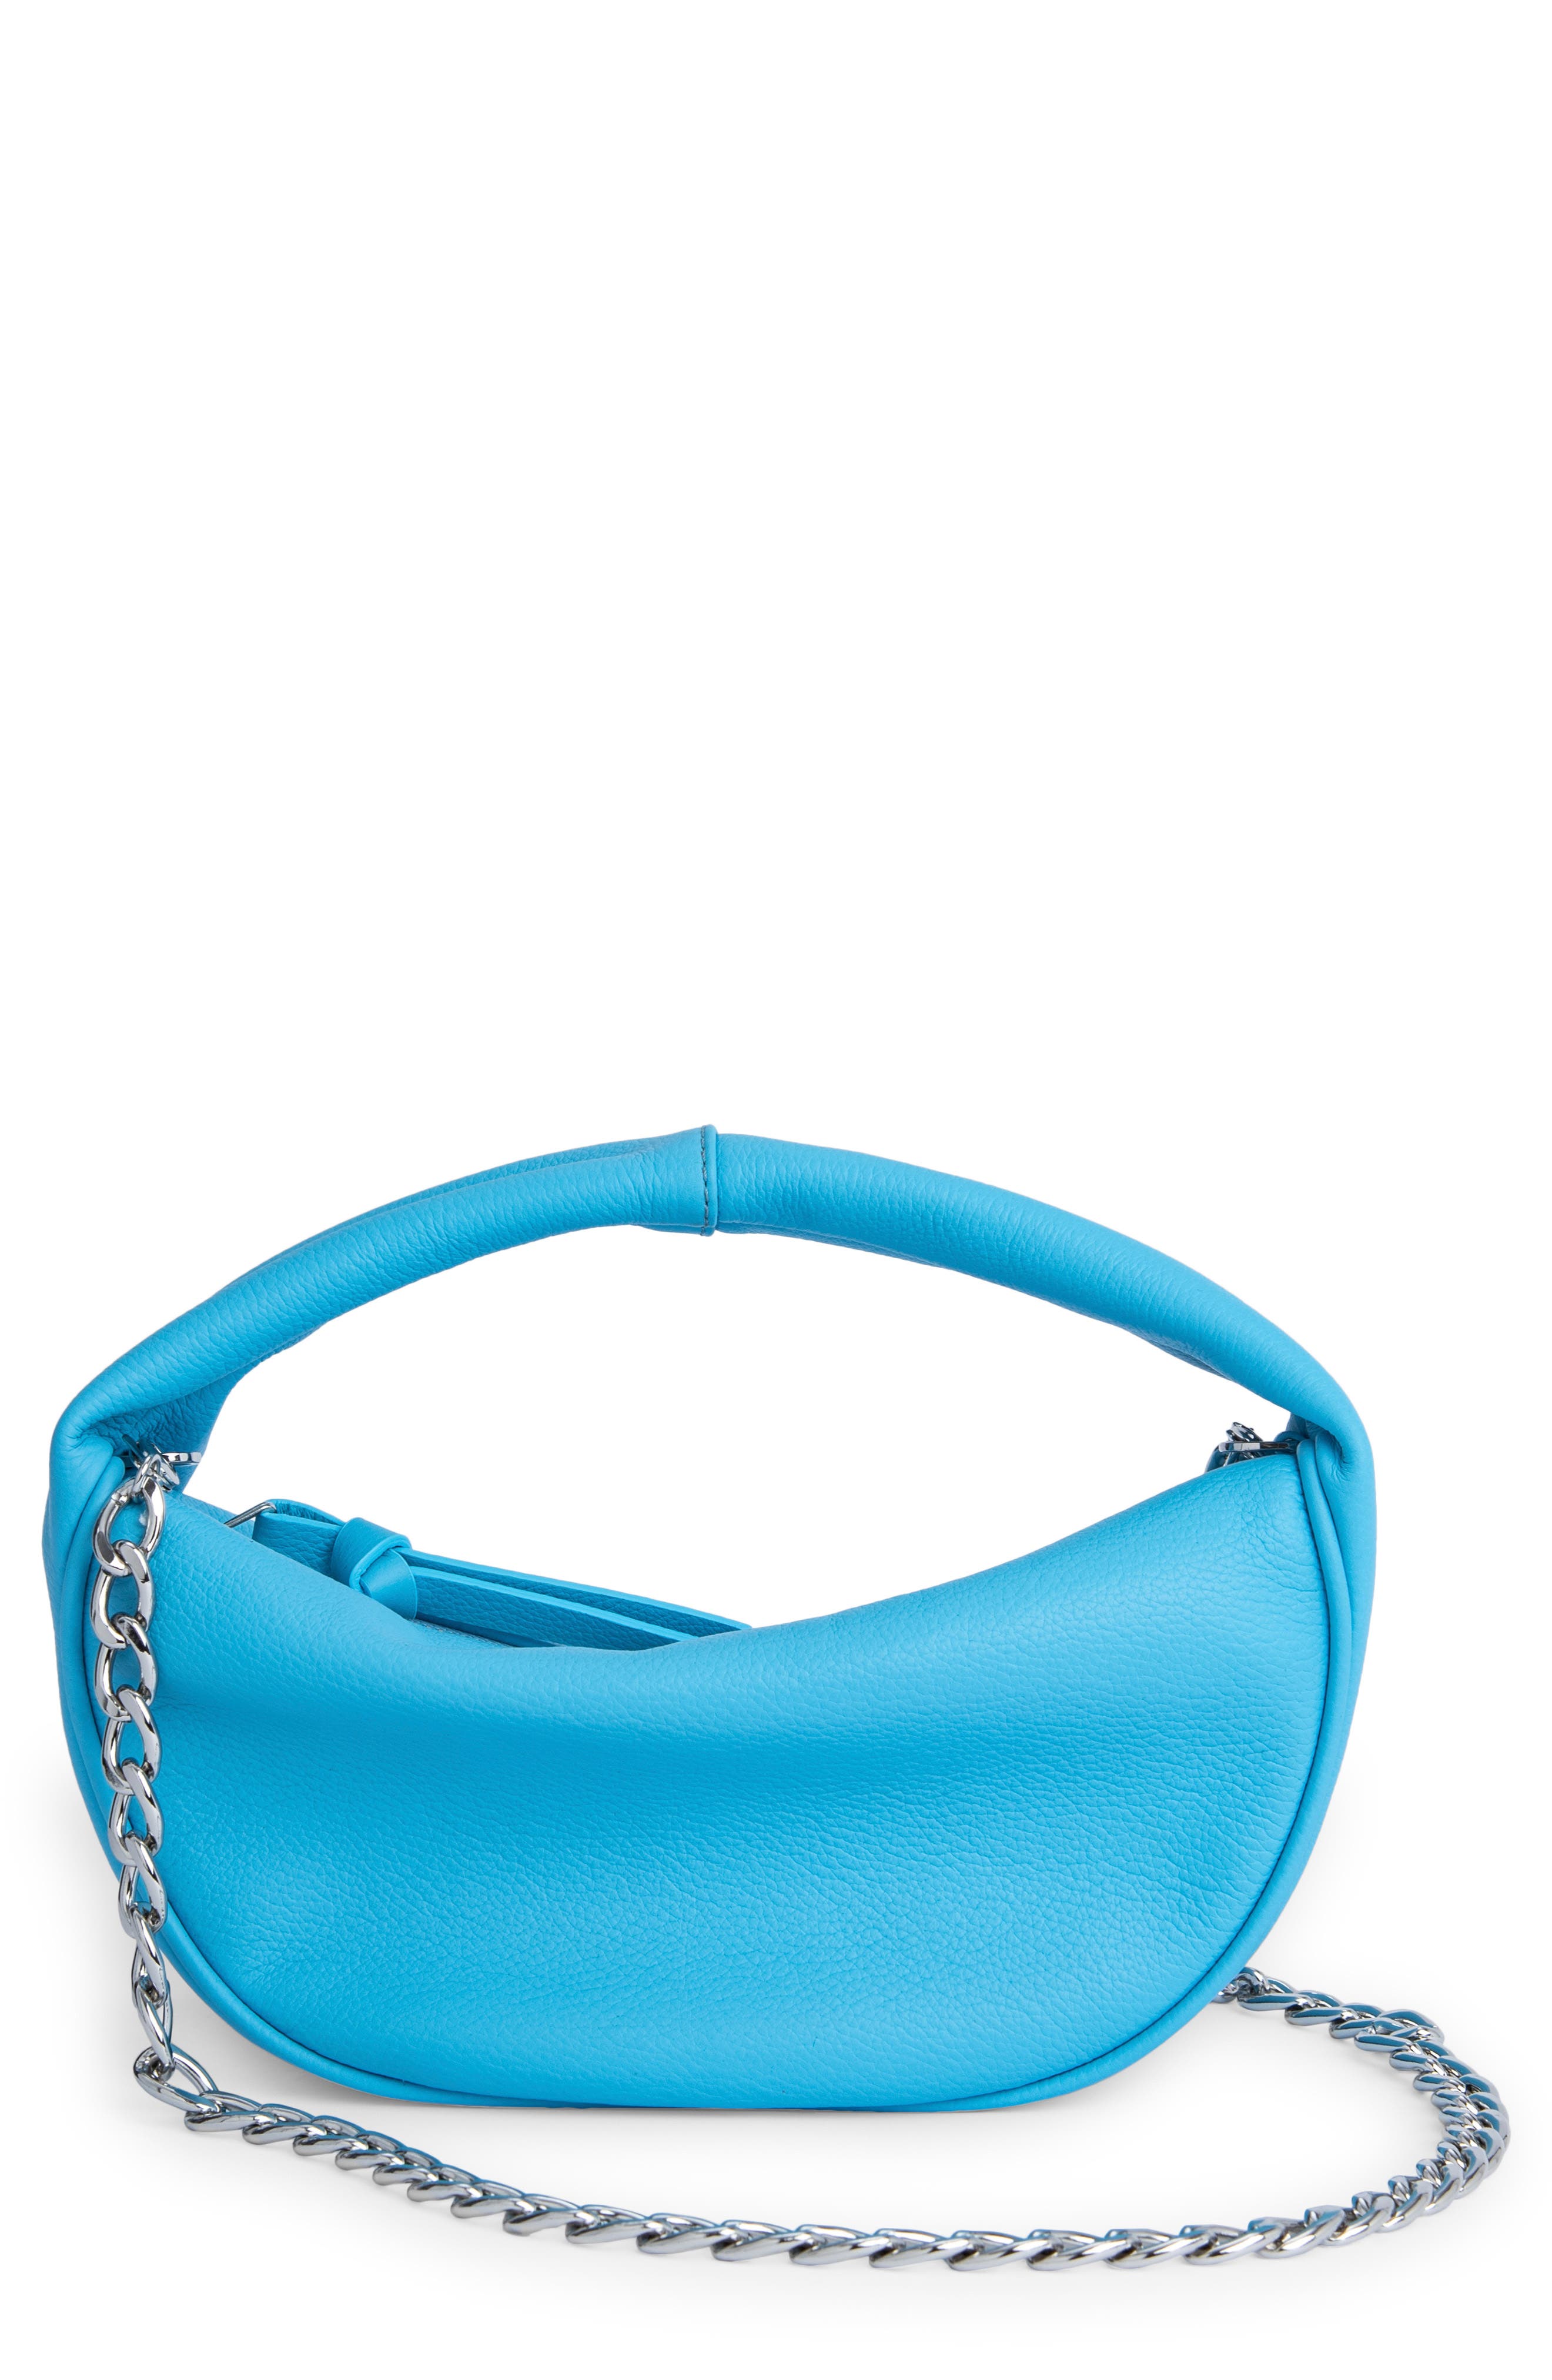 By Far Baby Cush Leather Bag in Lagoon at Nordstrom